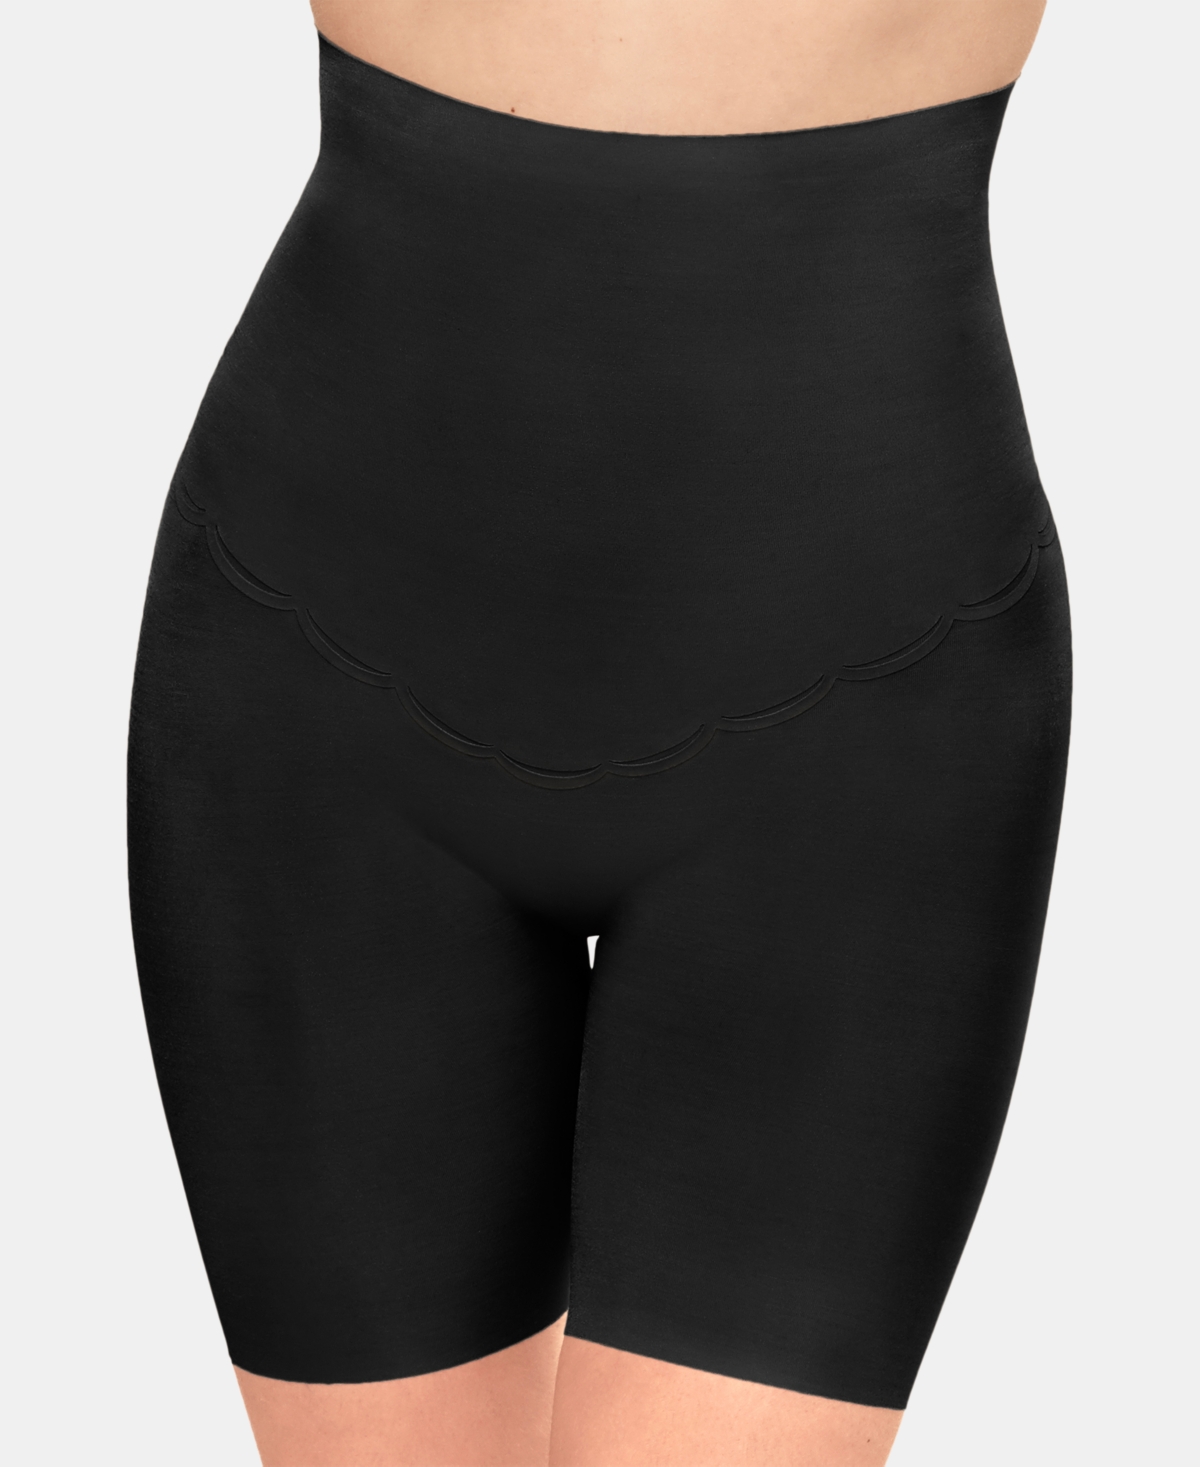 UPC 719544847056 product image for Wacoal Women's Inside Edit Firm Tummy-Control High Waist Thigh Slimmer 808307 | upcitemdb.com